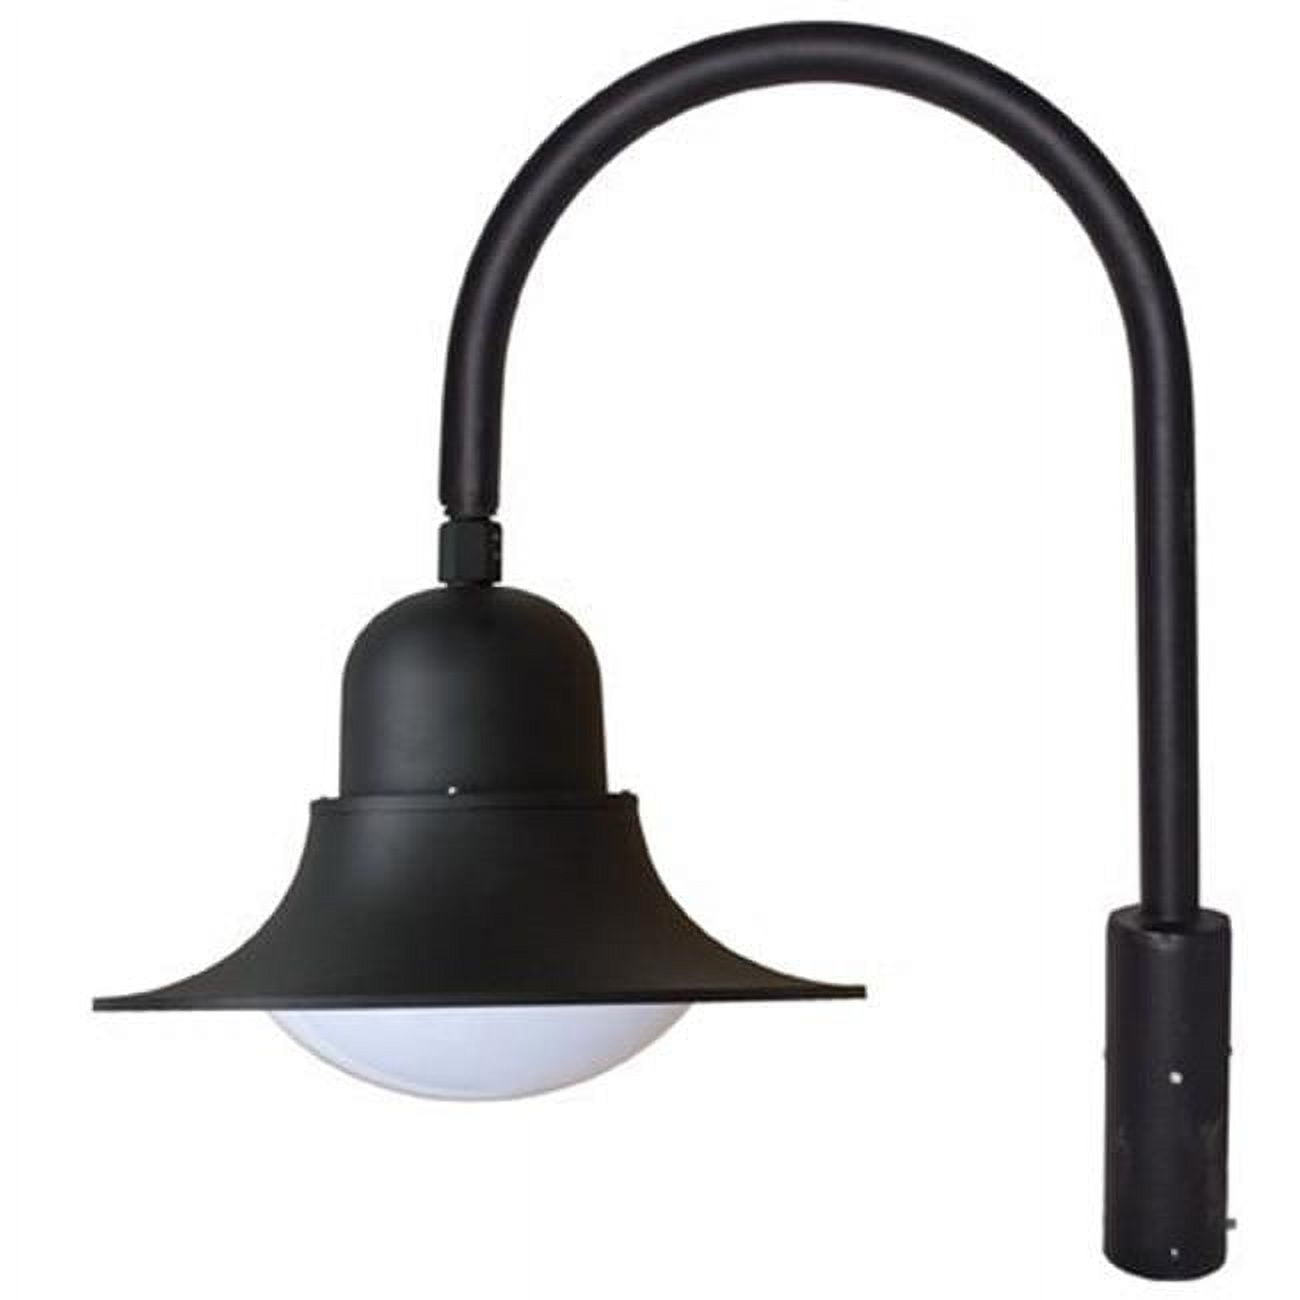 Picture of Dabmar Lighting GM617-B 70W 120V Powder Coated Cast Aluminum Post Top Light Fixture with Metal Halide Lamp, Black - 35.50 x 22 x 30.92 in.